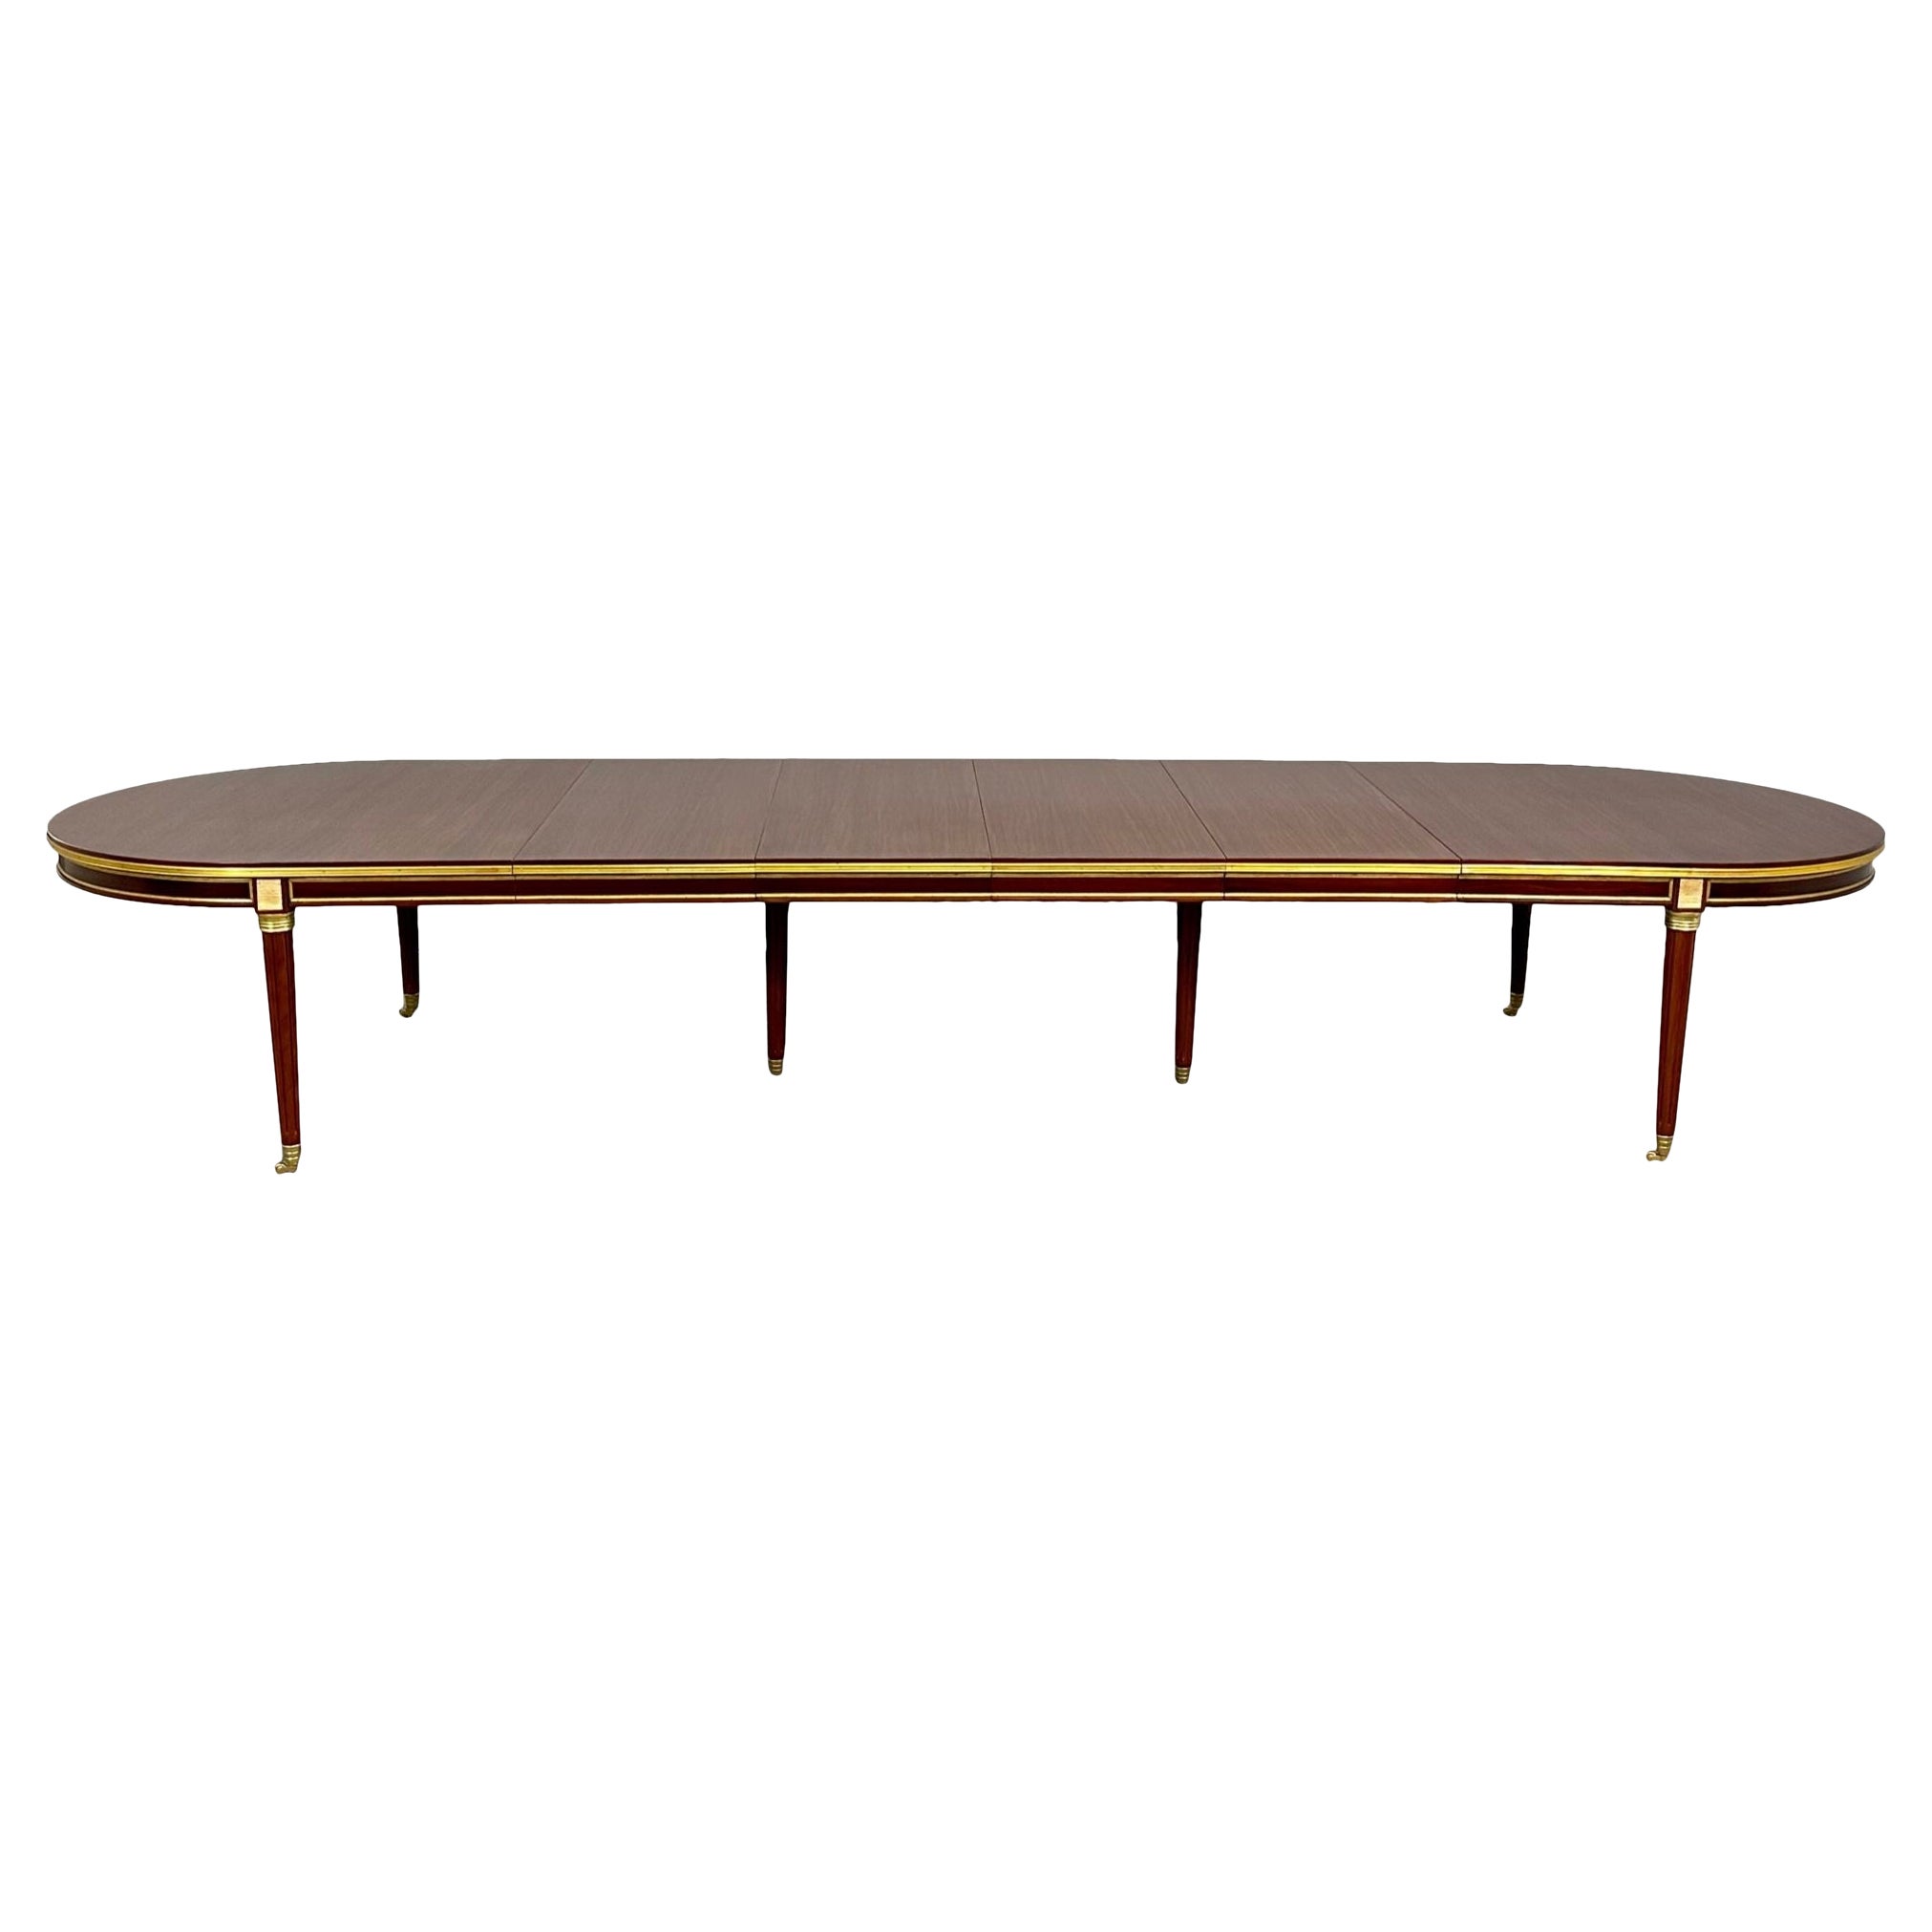 Monumental Louis XVI Hollywood Regency Dining Table, 15 Feet, Bronze Mounted For Sale